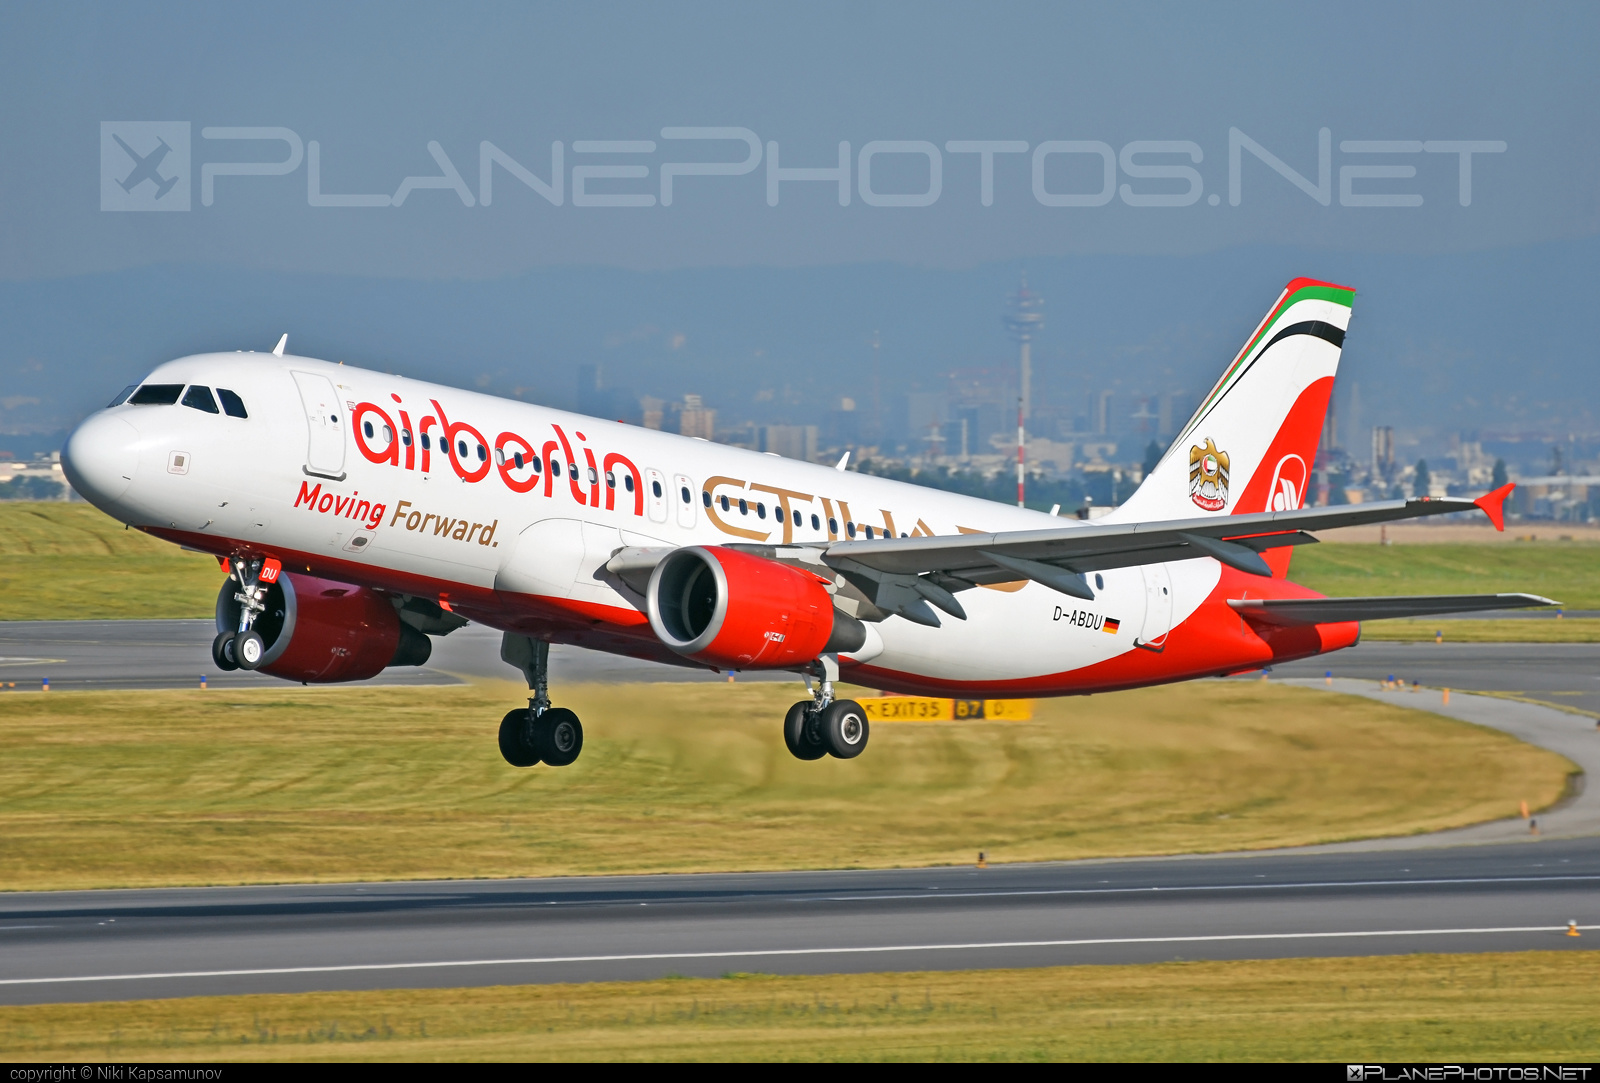 Airbus A320-214 - D-ABDU operated by Air Berlin #a320 #a320family #airberlin #airbus #airbus320